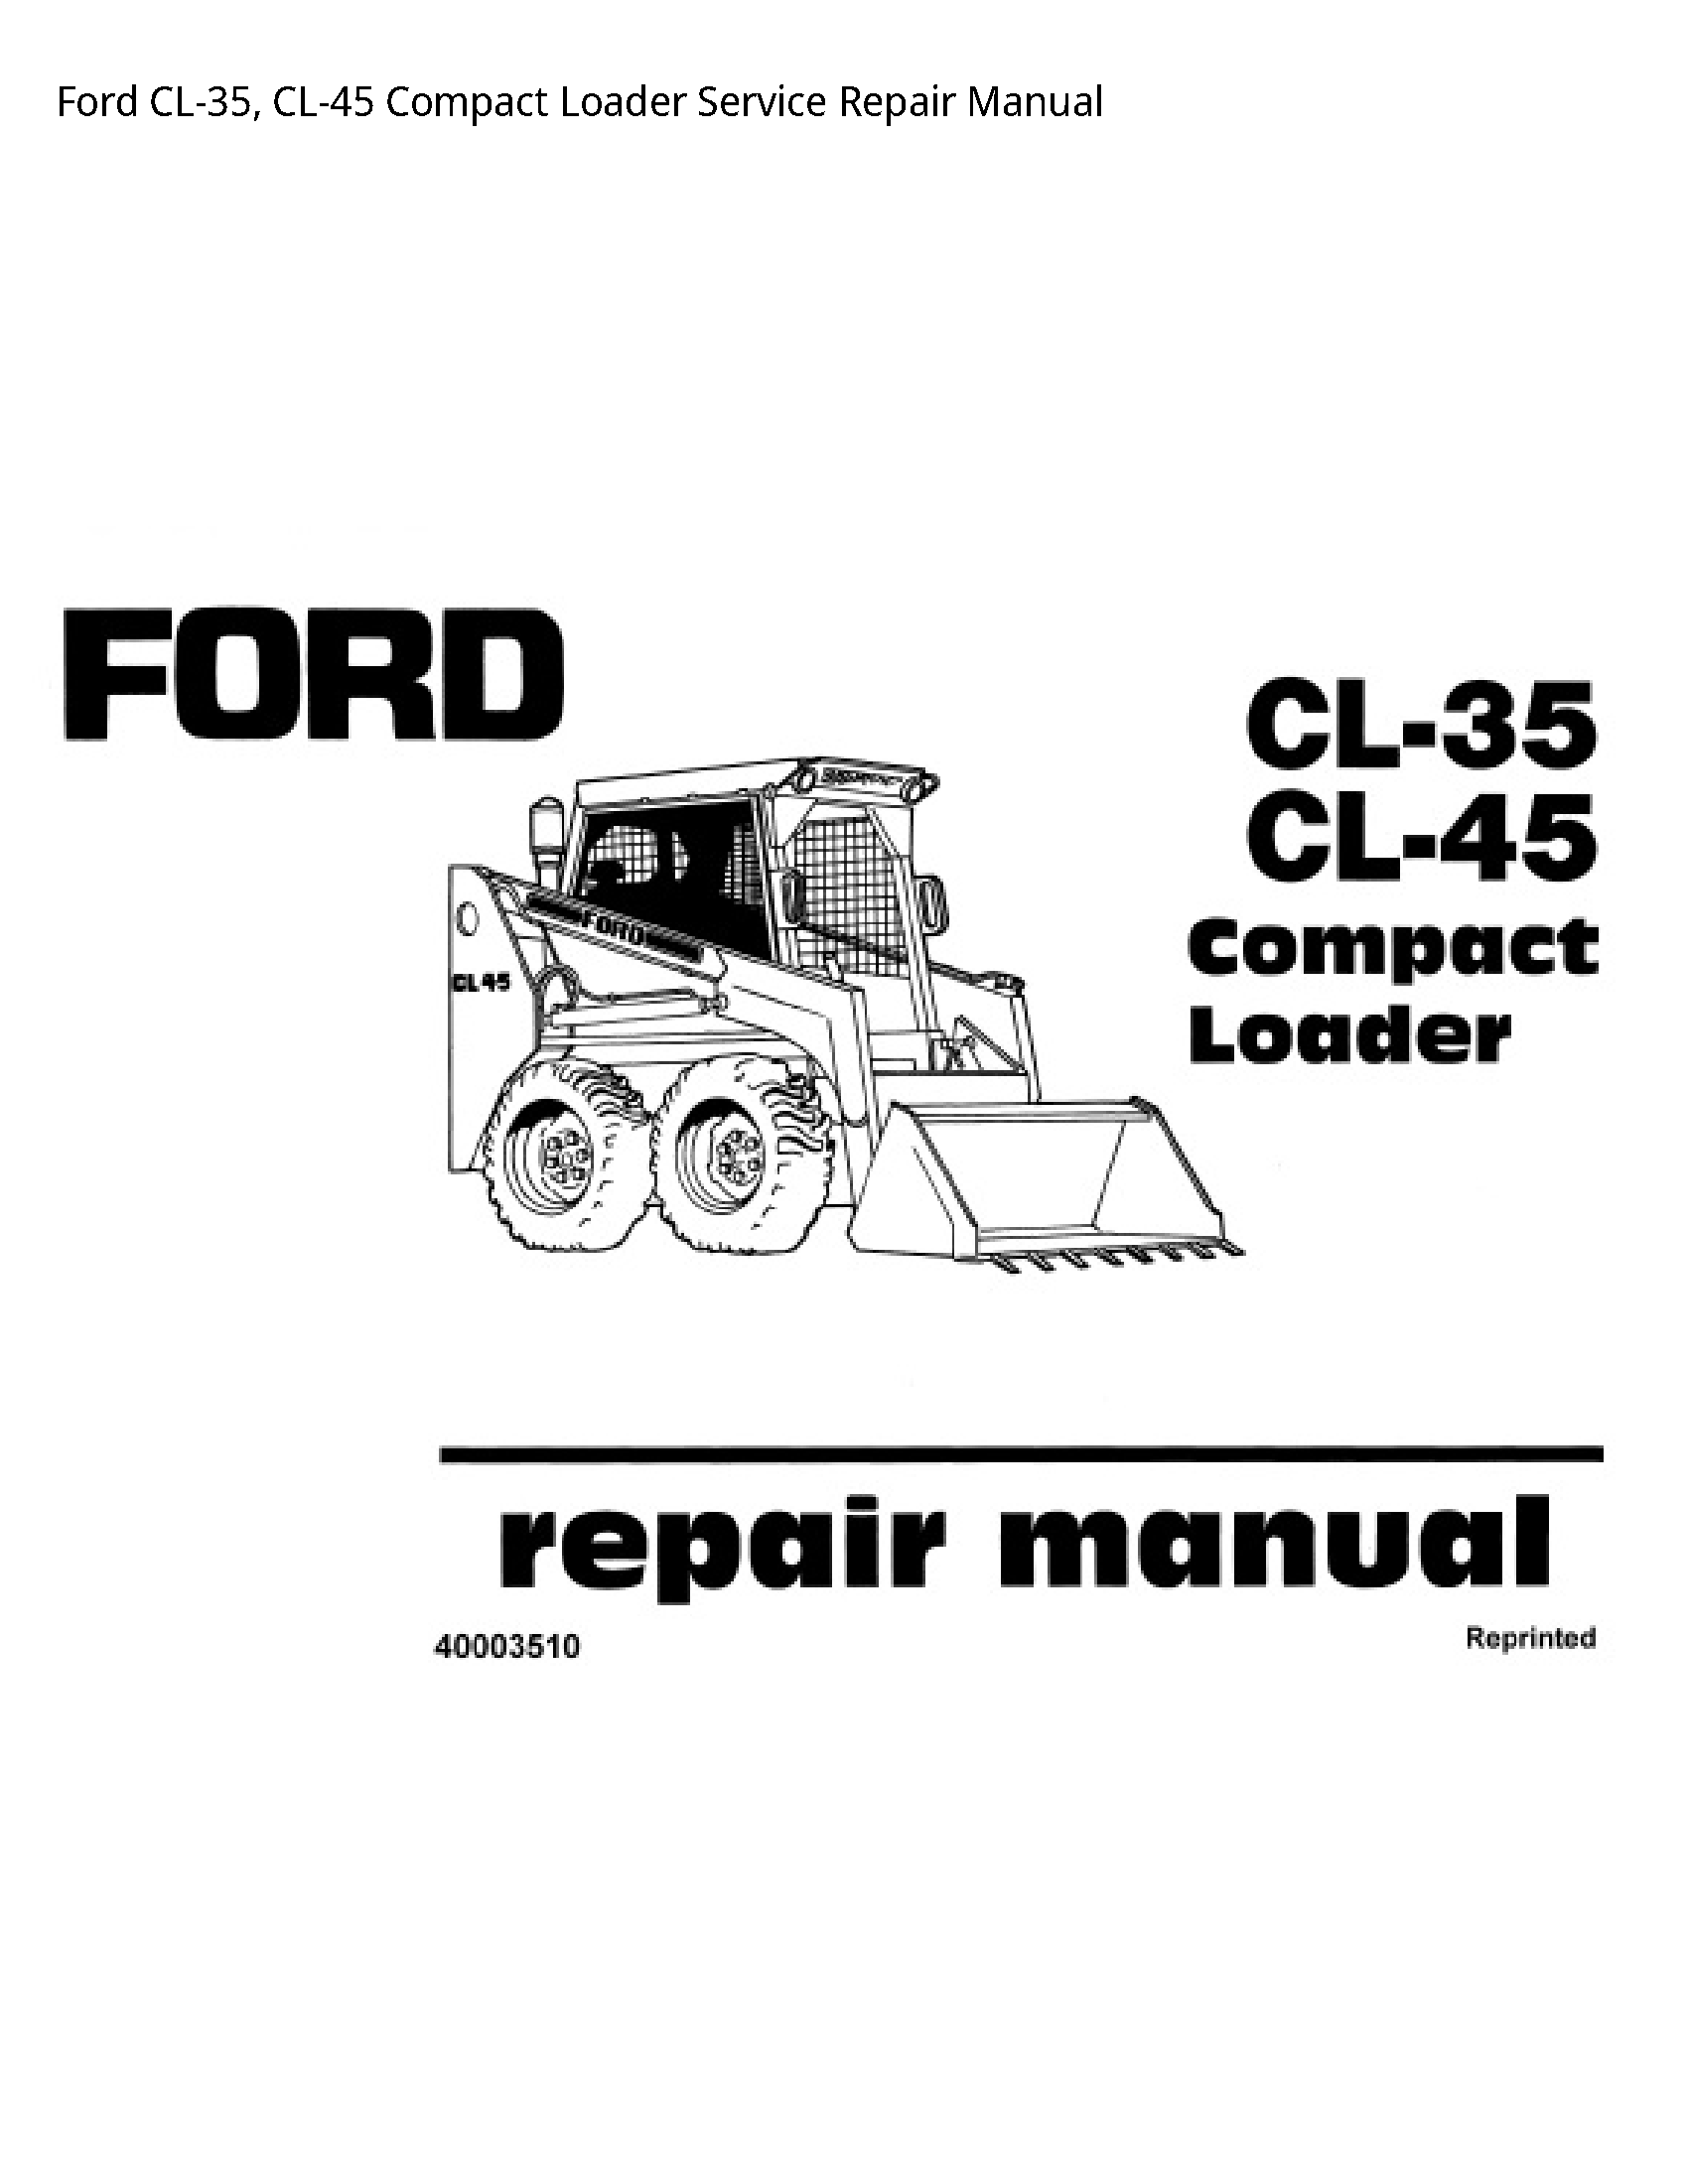 Ford CL-35 Compact Loader manual